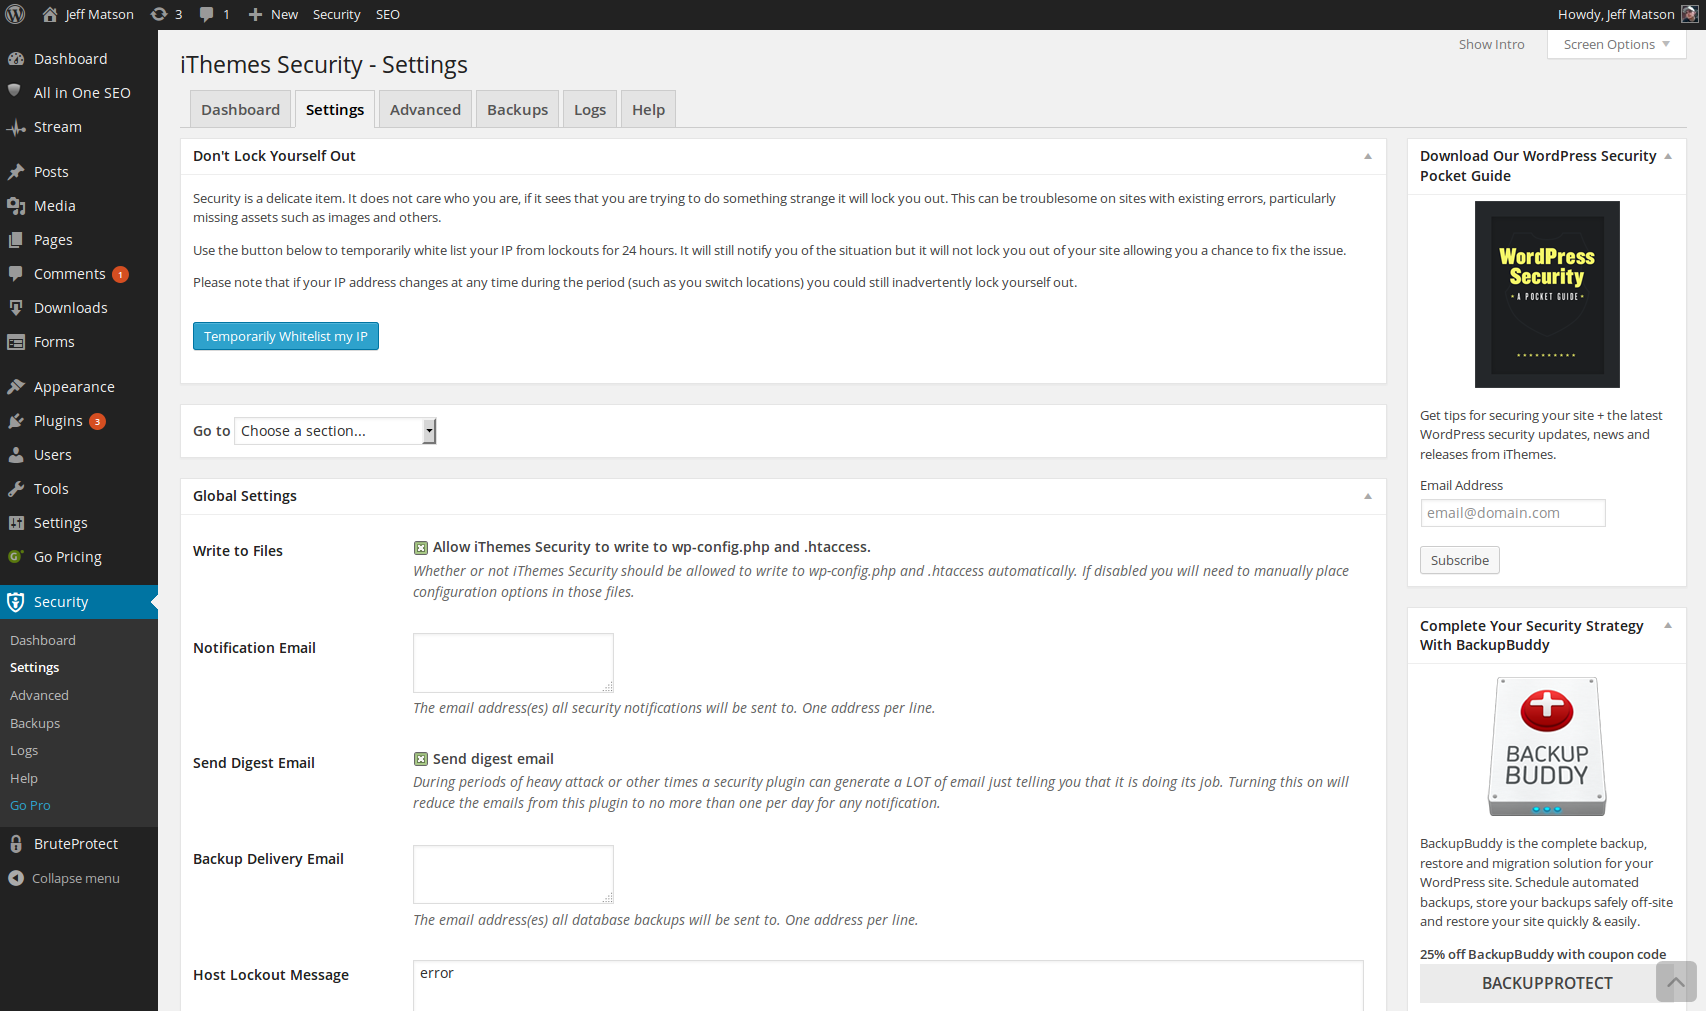 iThemes Security Settings page